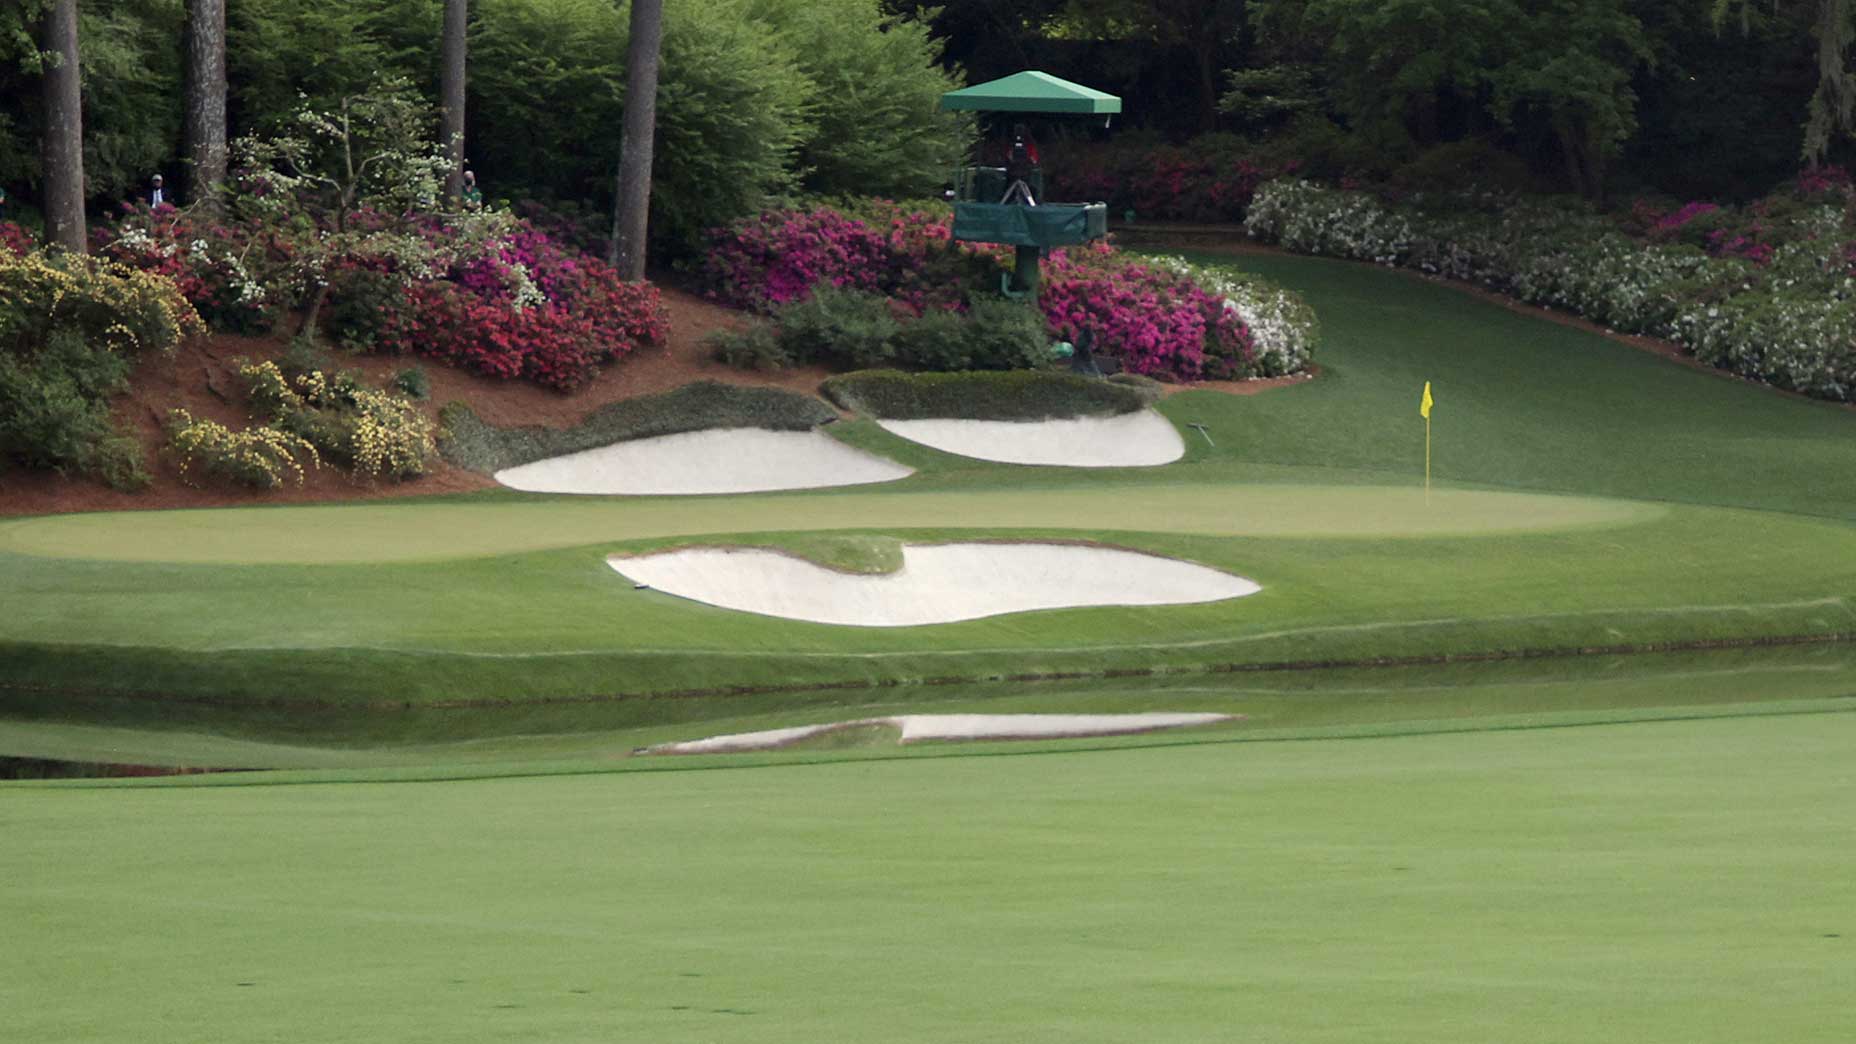 Comedian Bill Engvall caught a miserable break on Augusta’s famous 12th